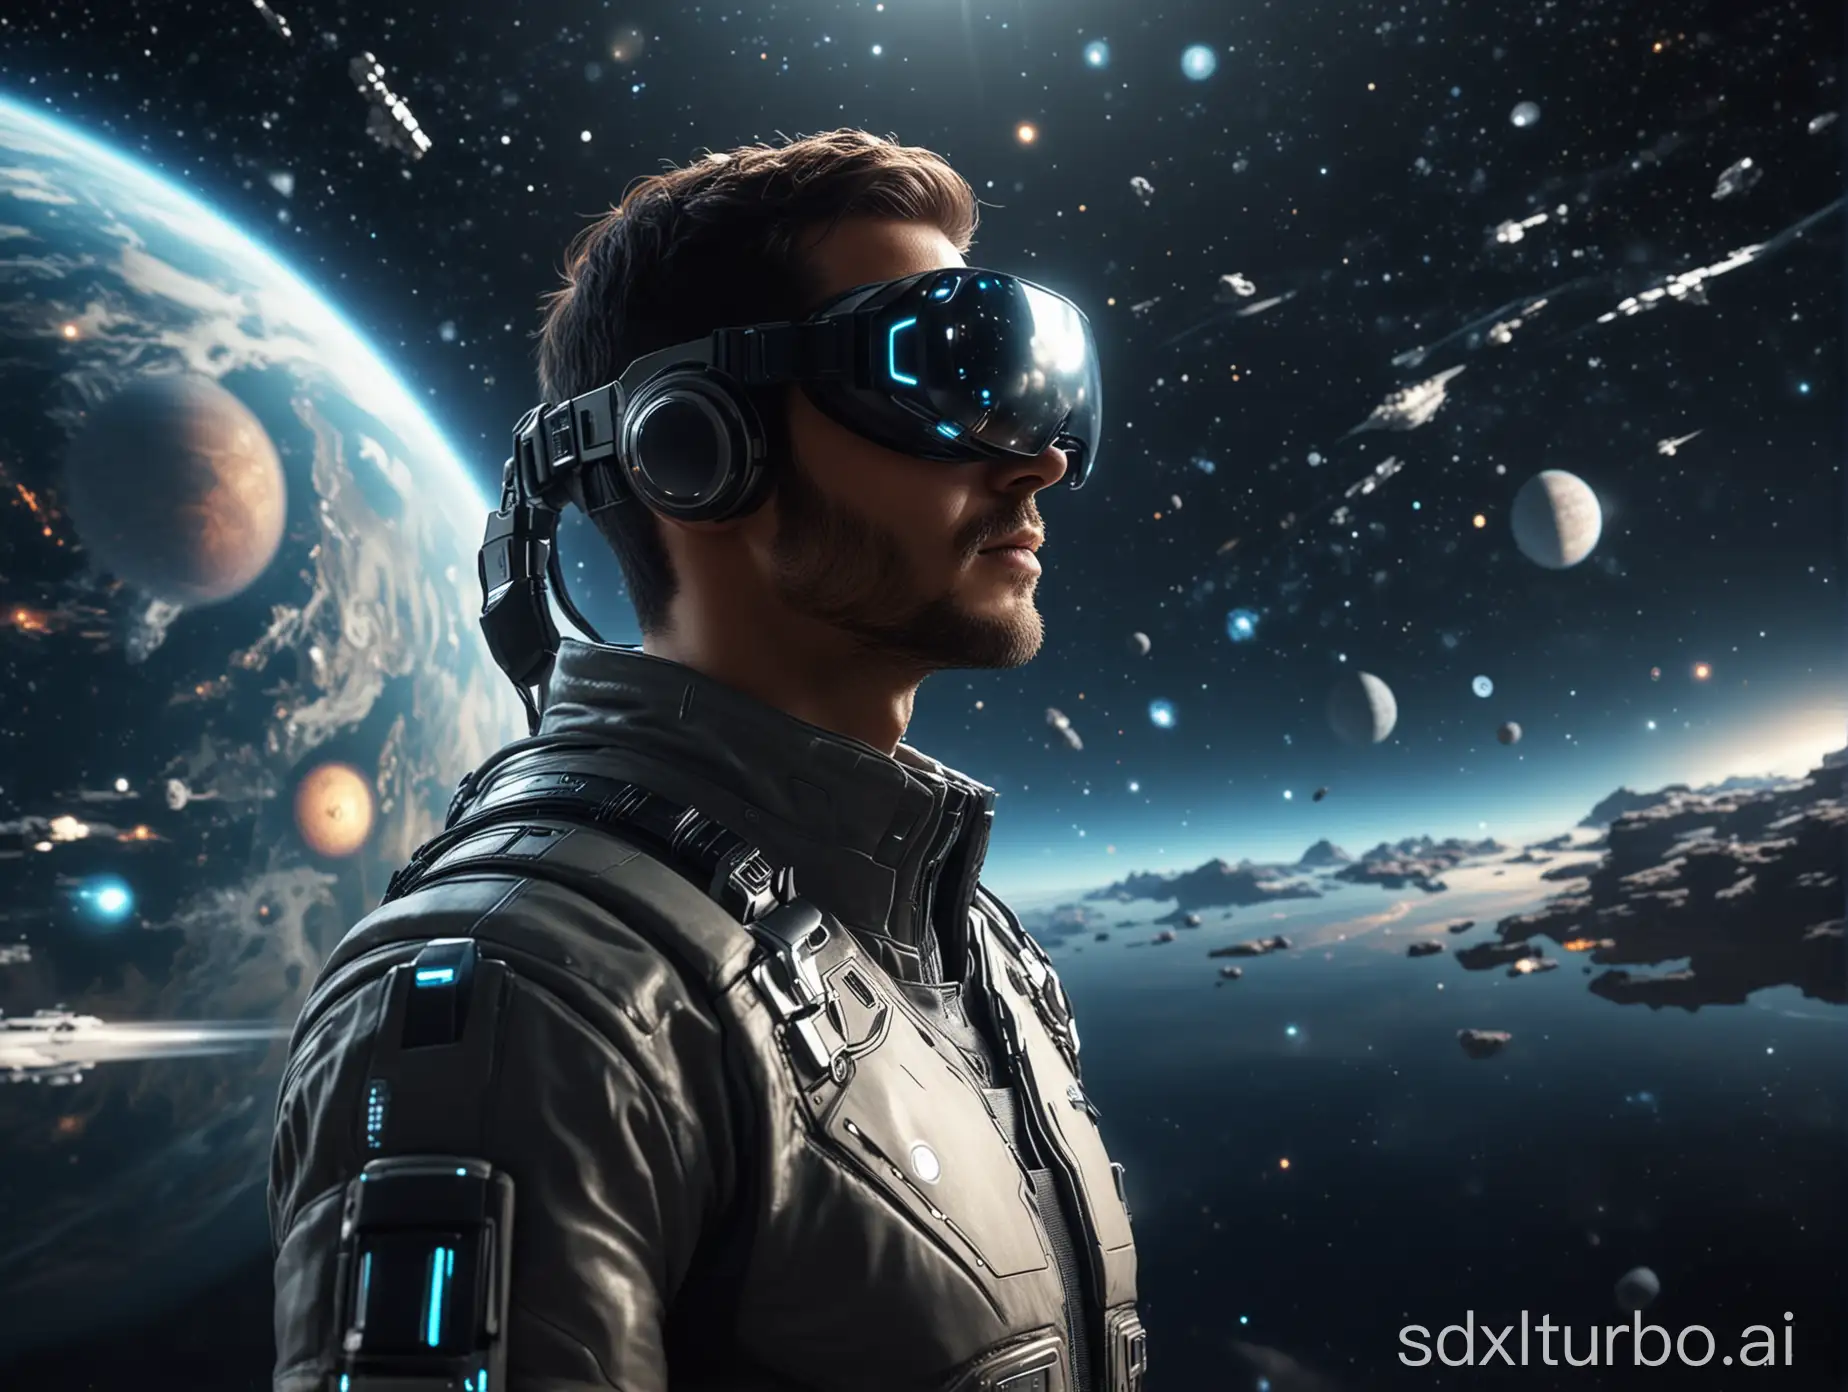 A man uses virtual imaging technology to explore the universe, full of technology, future, and science fiction sense, 8k quality, realistic style.